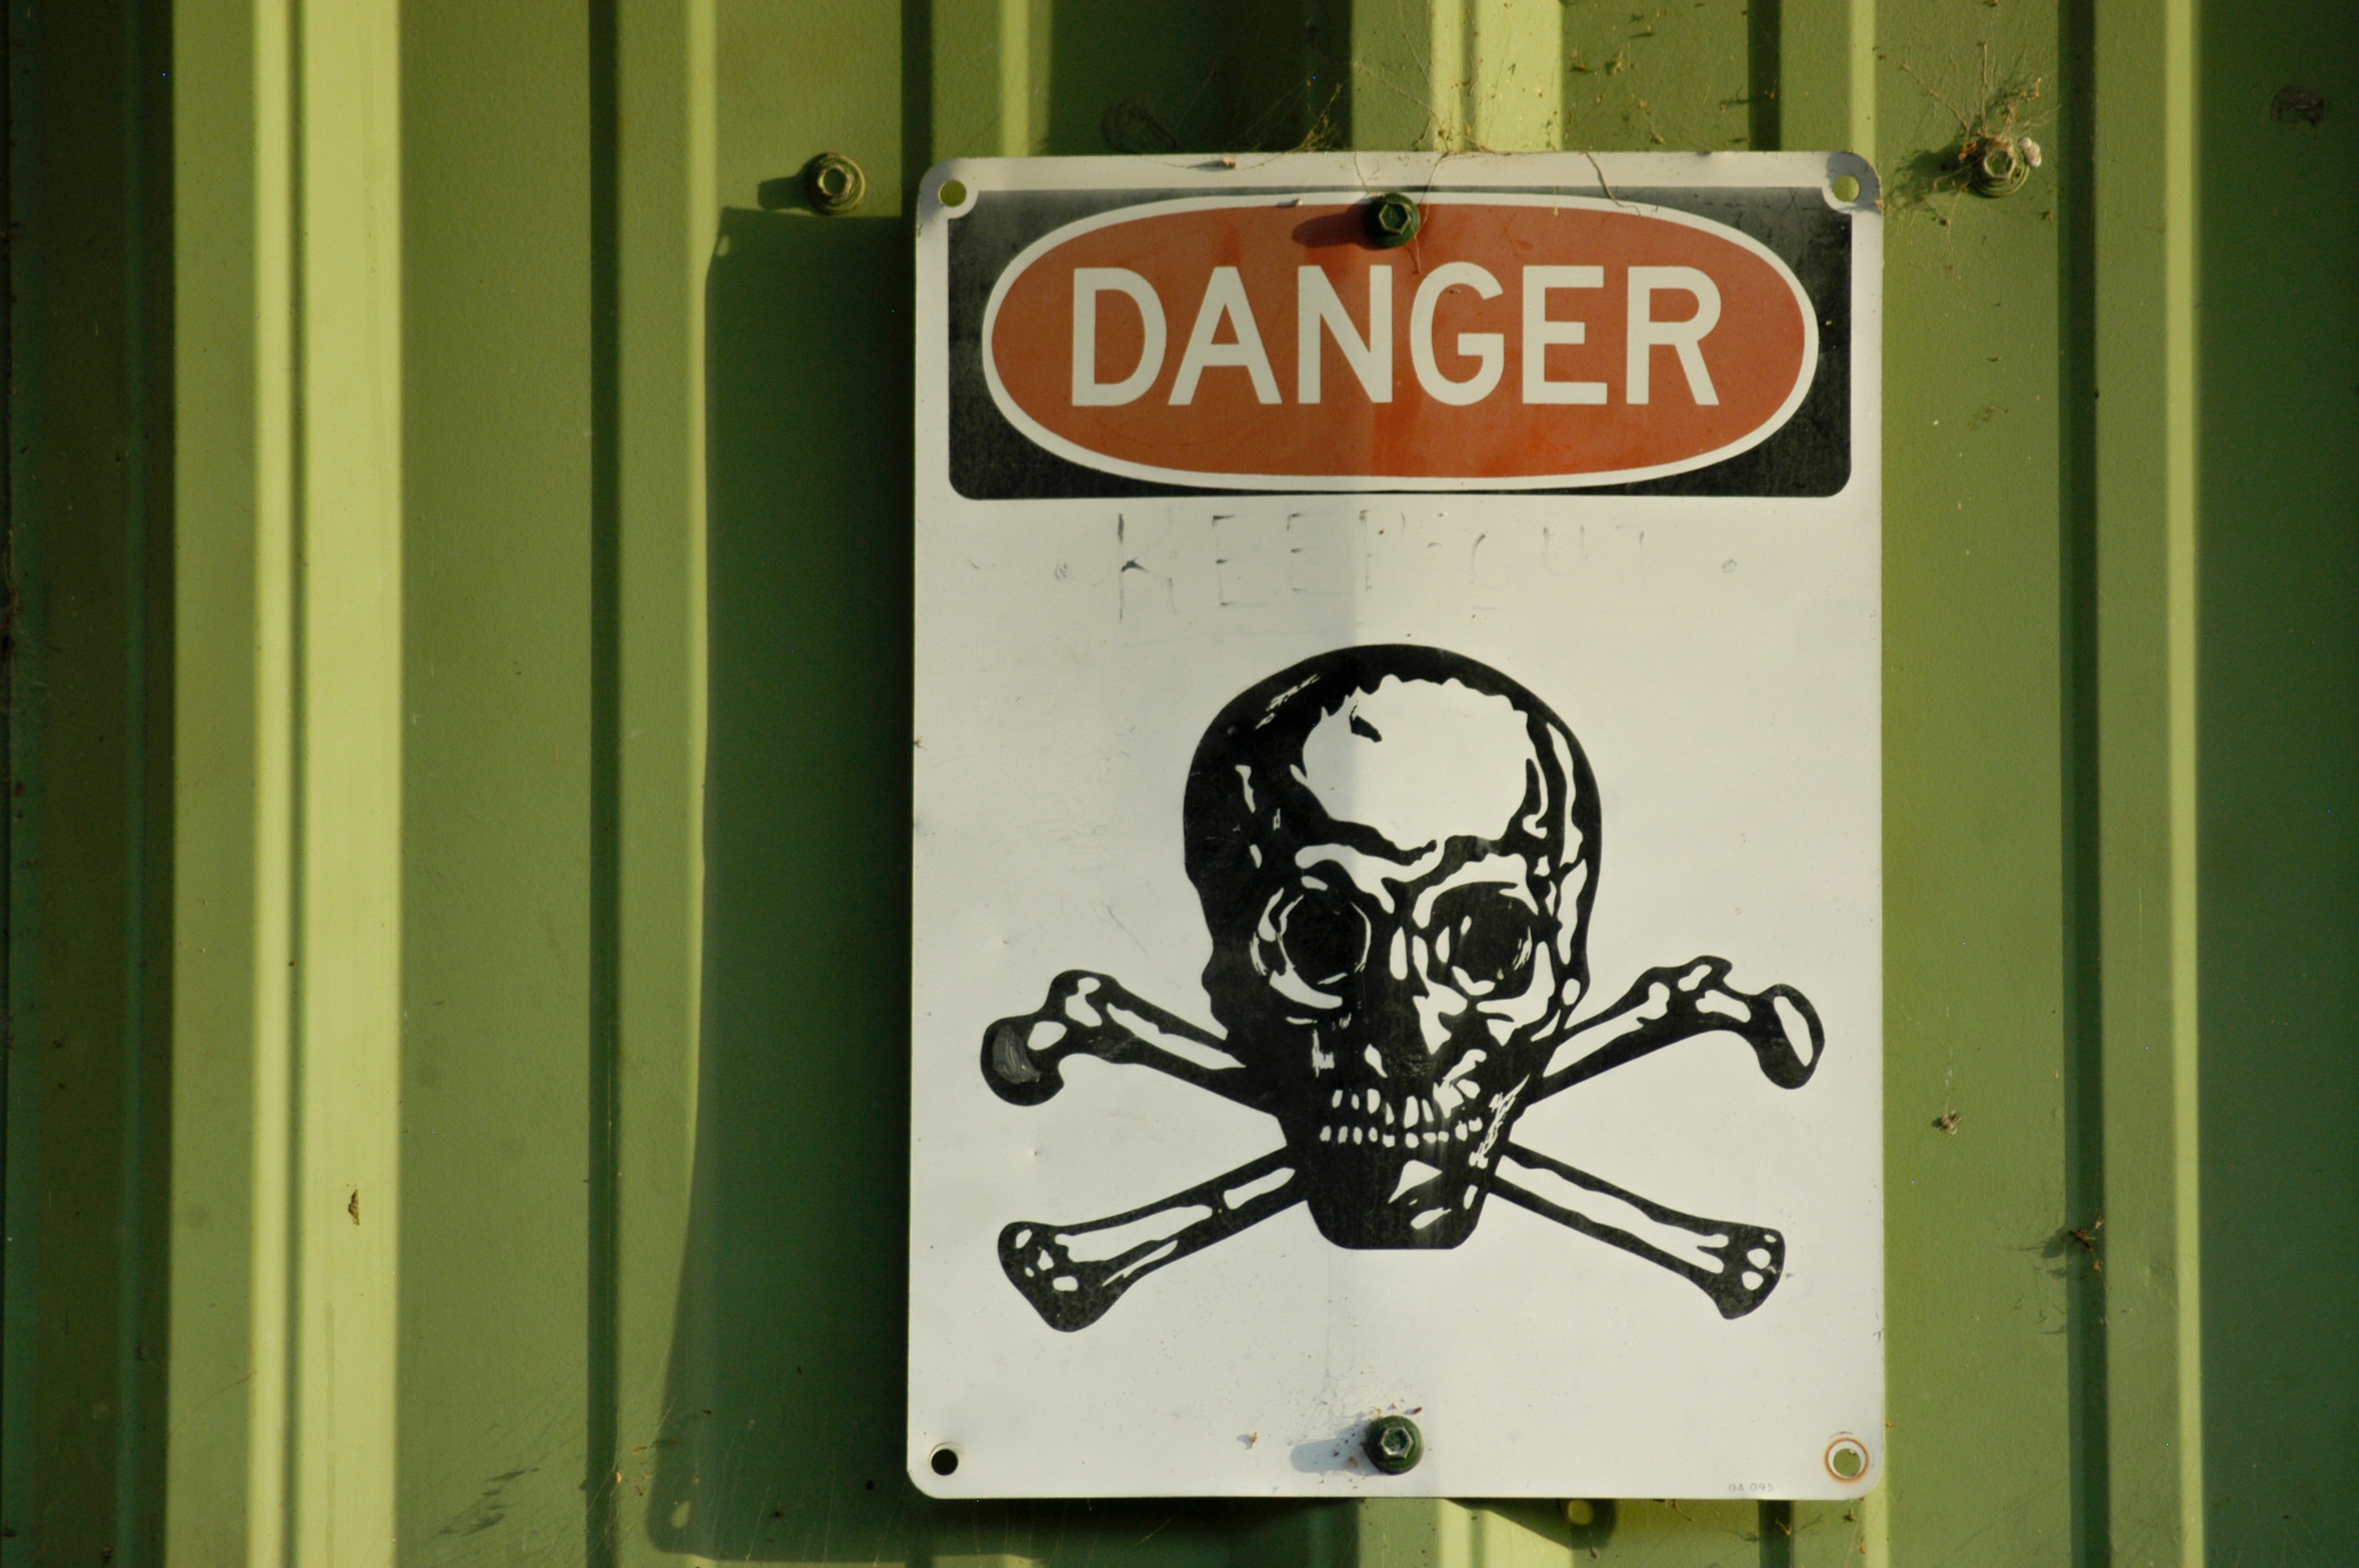 a danger sign featuring a skull and crossbones posted on a green wall